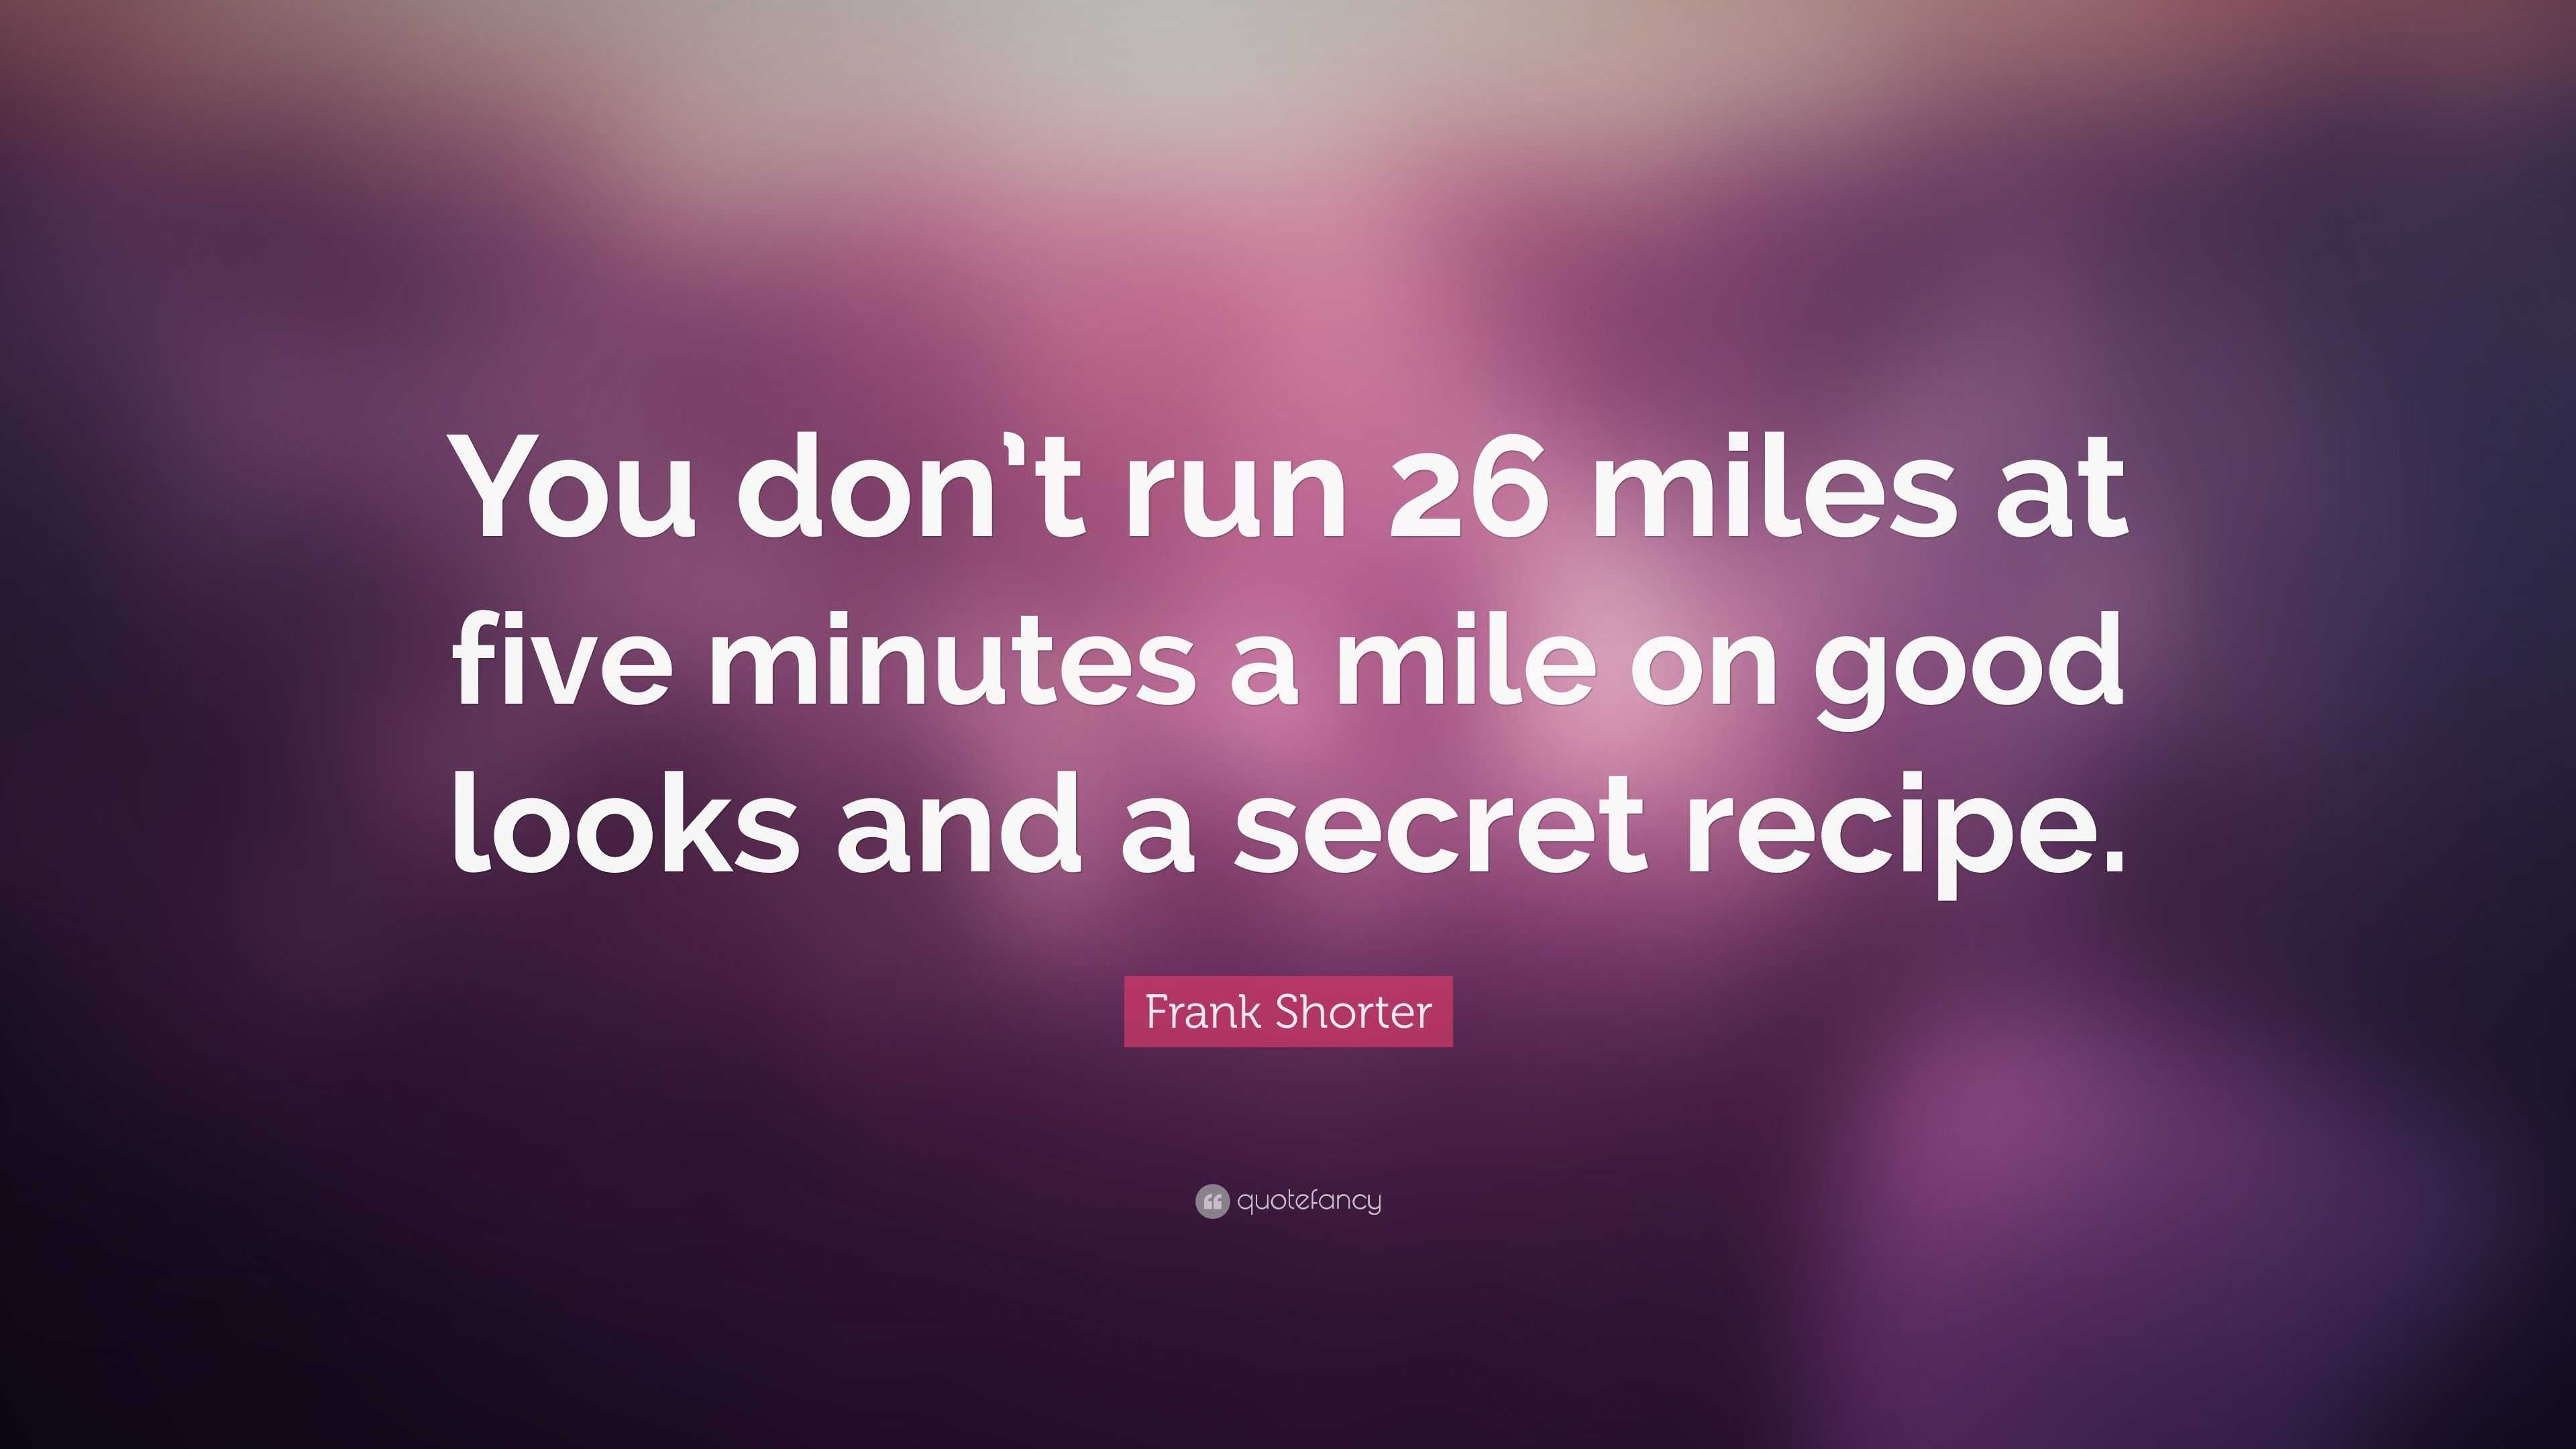 Frank Shorter - You don't run 26 miles at five minutes a